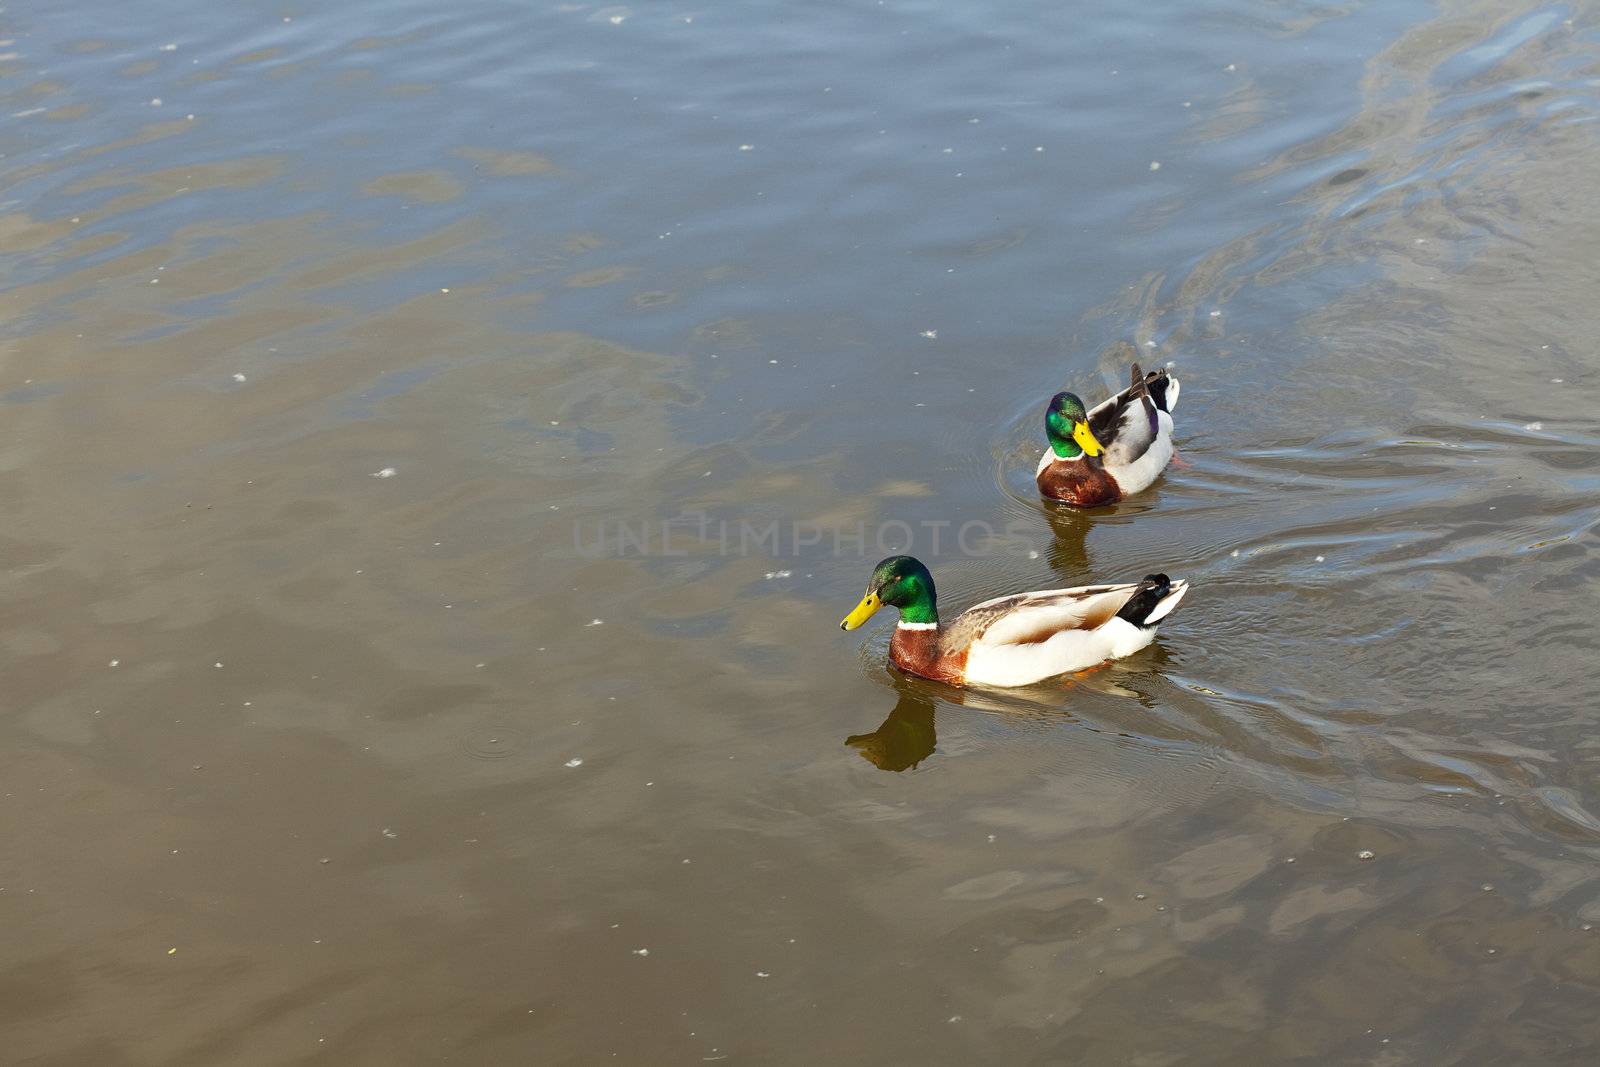 ducks floating in the water by jannyjus